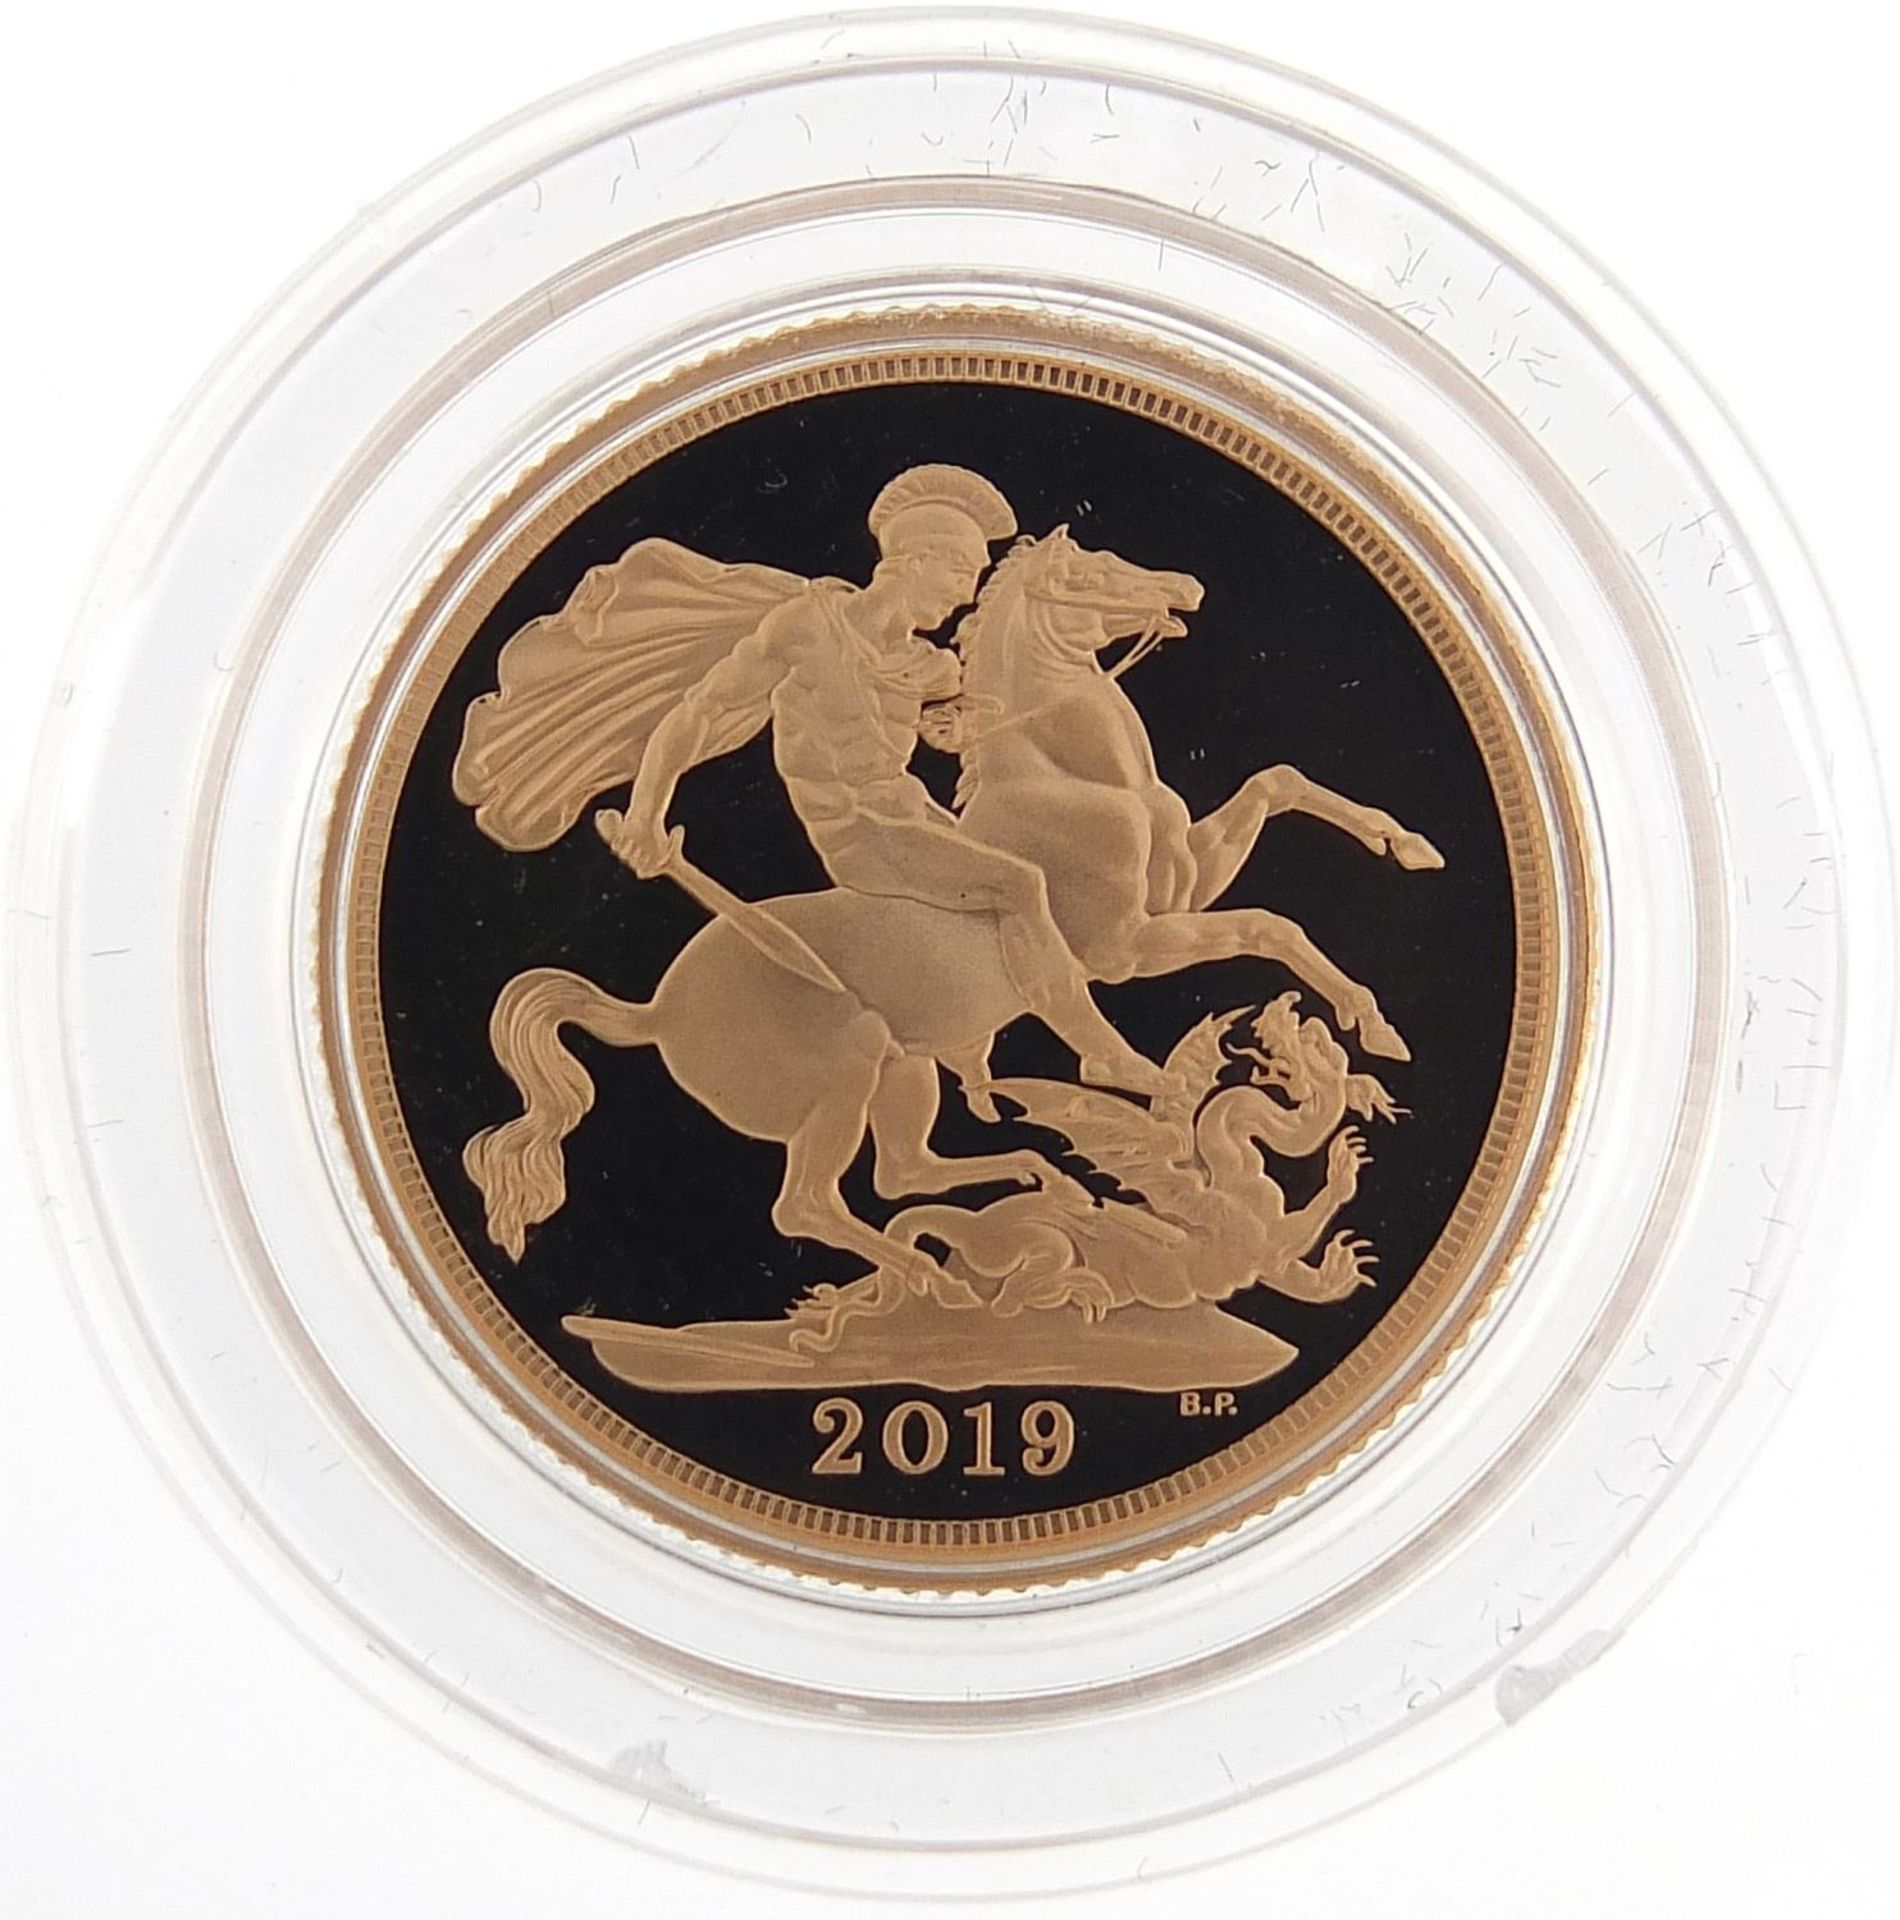 Elizabeth II 2019 gold proof sovereign with box and certificate, 7116/9500 - this lot is sold - Image 2 of 4